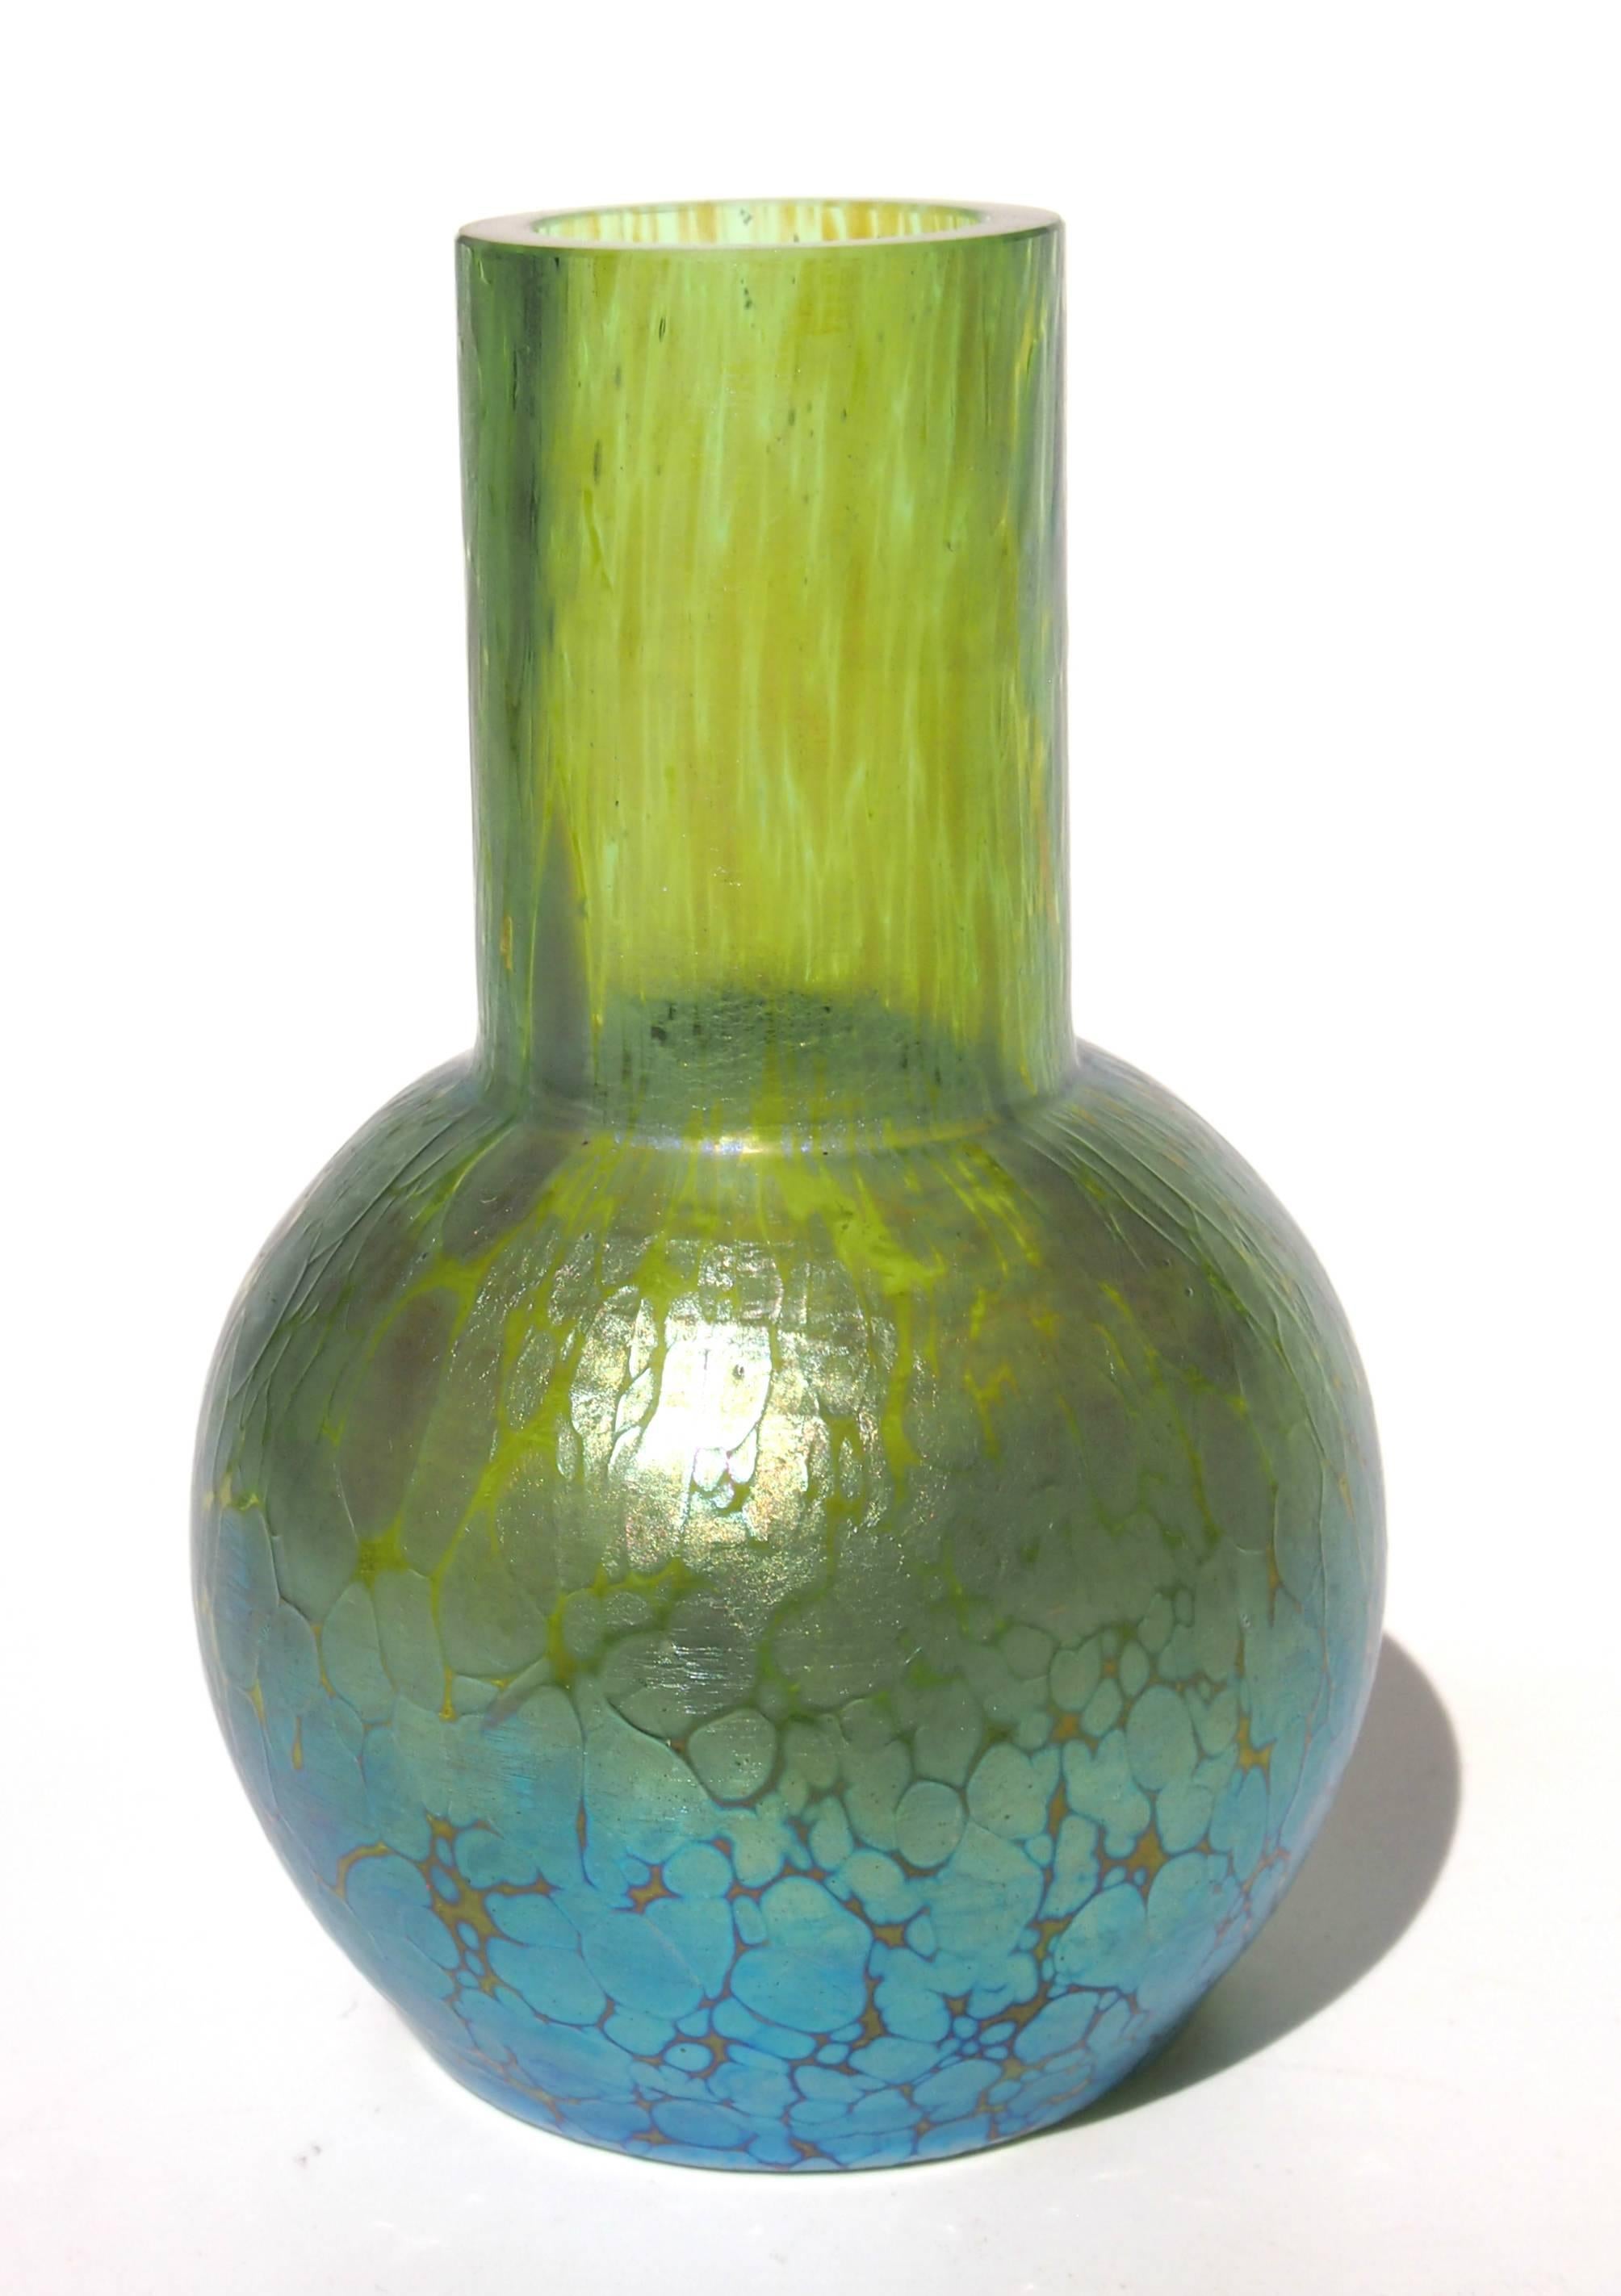 Super Loetz Crete (green glass) Papillon (butterfly wing) small vase in the Classic globe and shaft shape -the iridized finish is particularly pleasing- It has a cold cut top and no pontil mark.